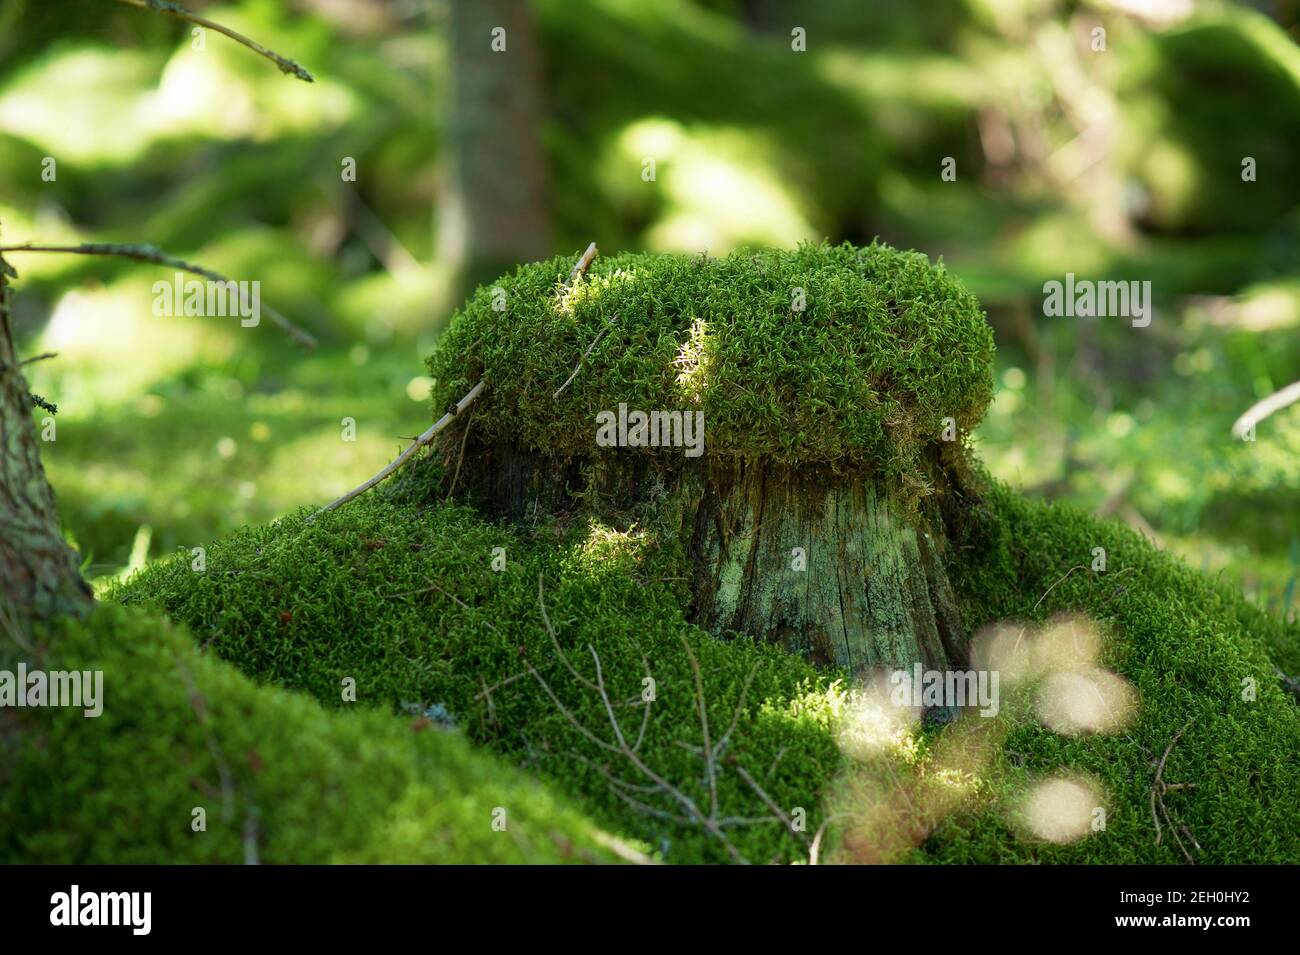 Green moss on a stump in the forest Stock Photo